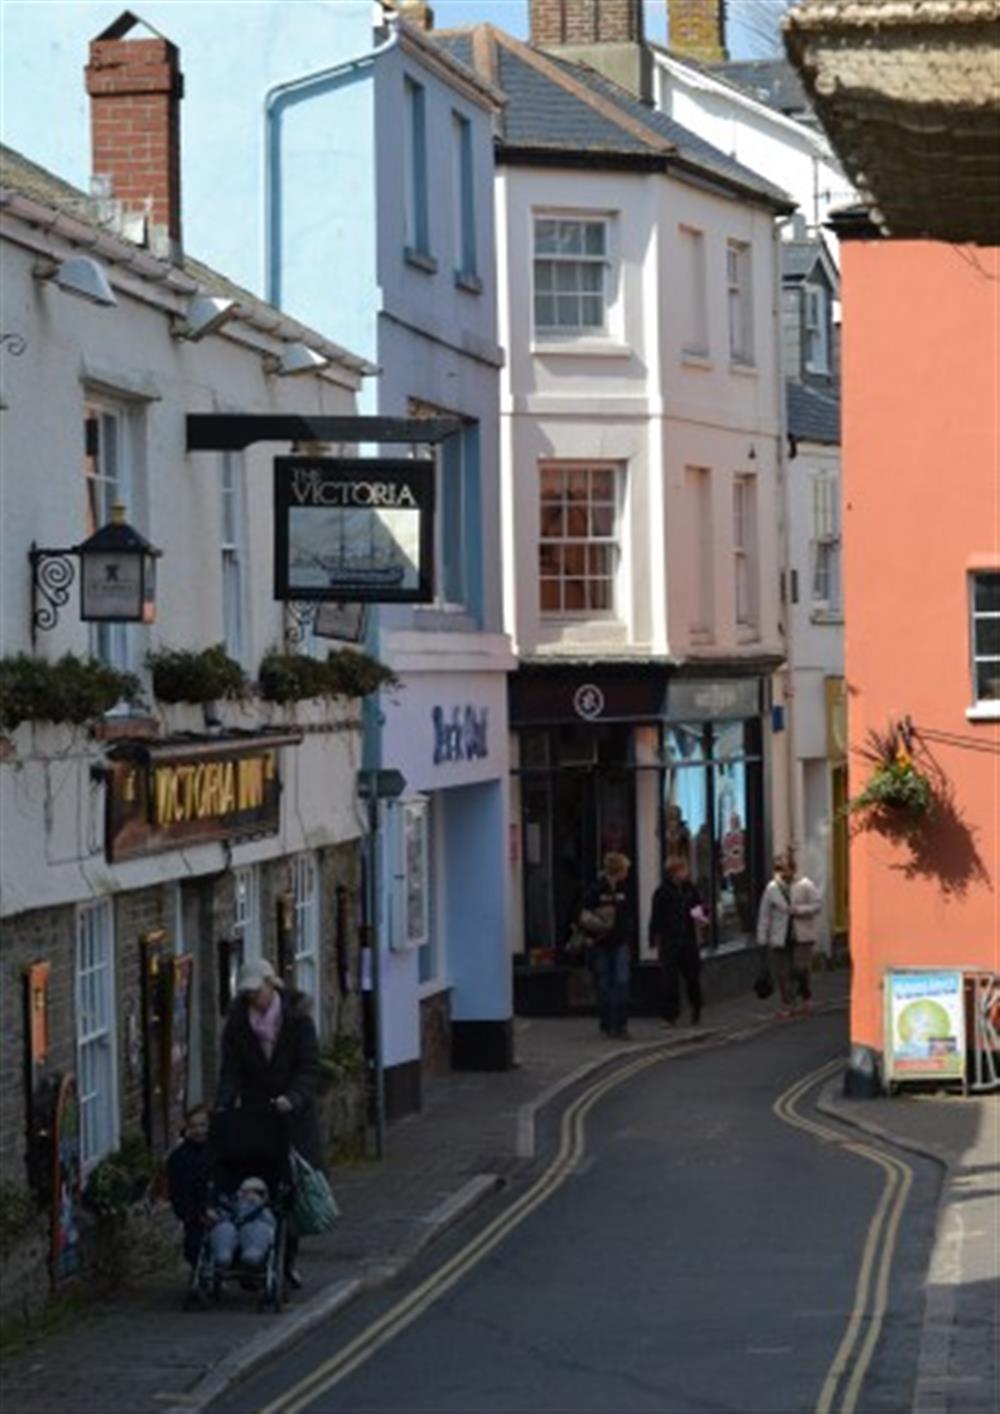 Great pubs, restaurants and shops in the town centre at Gulls Nest in Salcombe